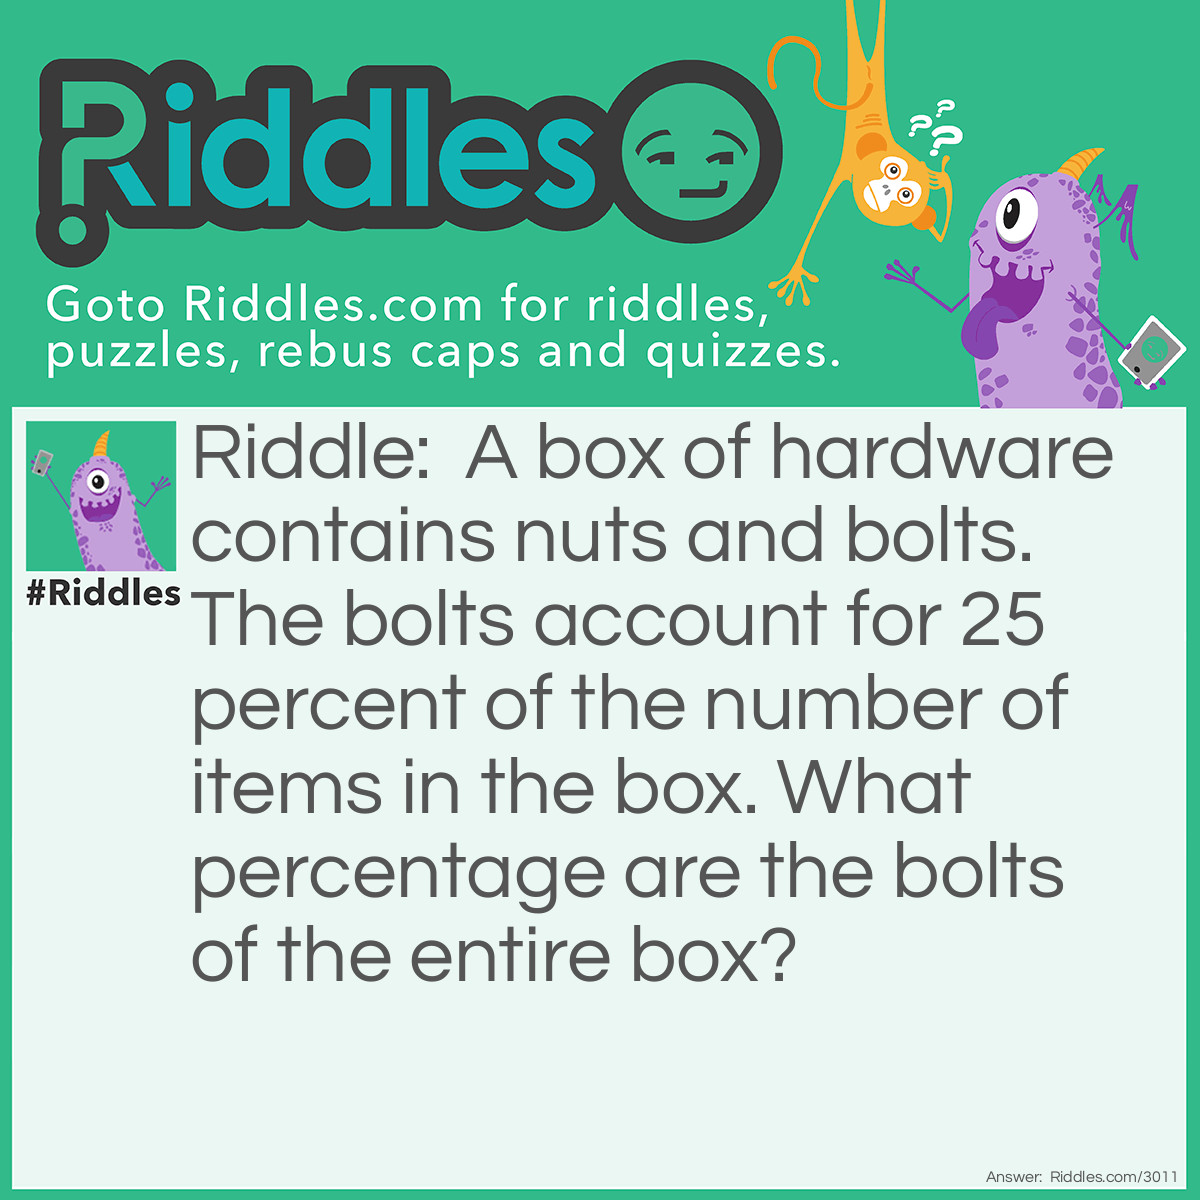 Riddle: A box of hardware contains nuts and bolts. The bolts account for 25 percent of the number of items in the box. What percentage are the bolts of the entire box? Answer: 20 percent. For example, there are 10 bolts.  Since the number of bolts is 25 percent of the number of items, there must be 40 nuts. The total number of items = 10 bolts + 40 nuts = 50.  So, 10/50 = 1/5 = 20%.